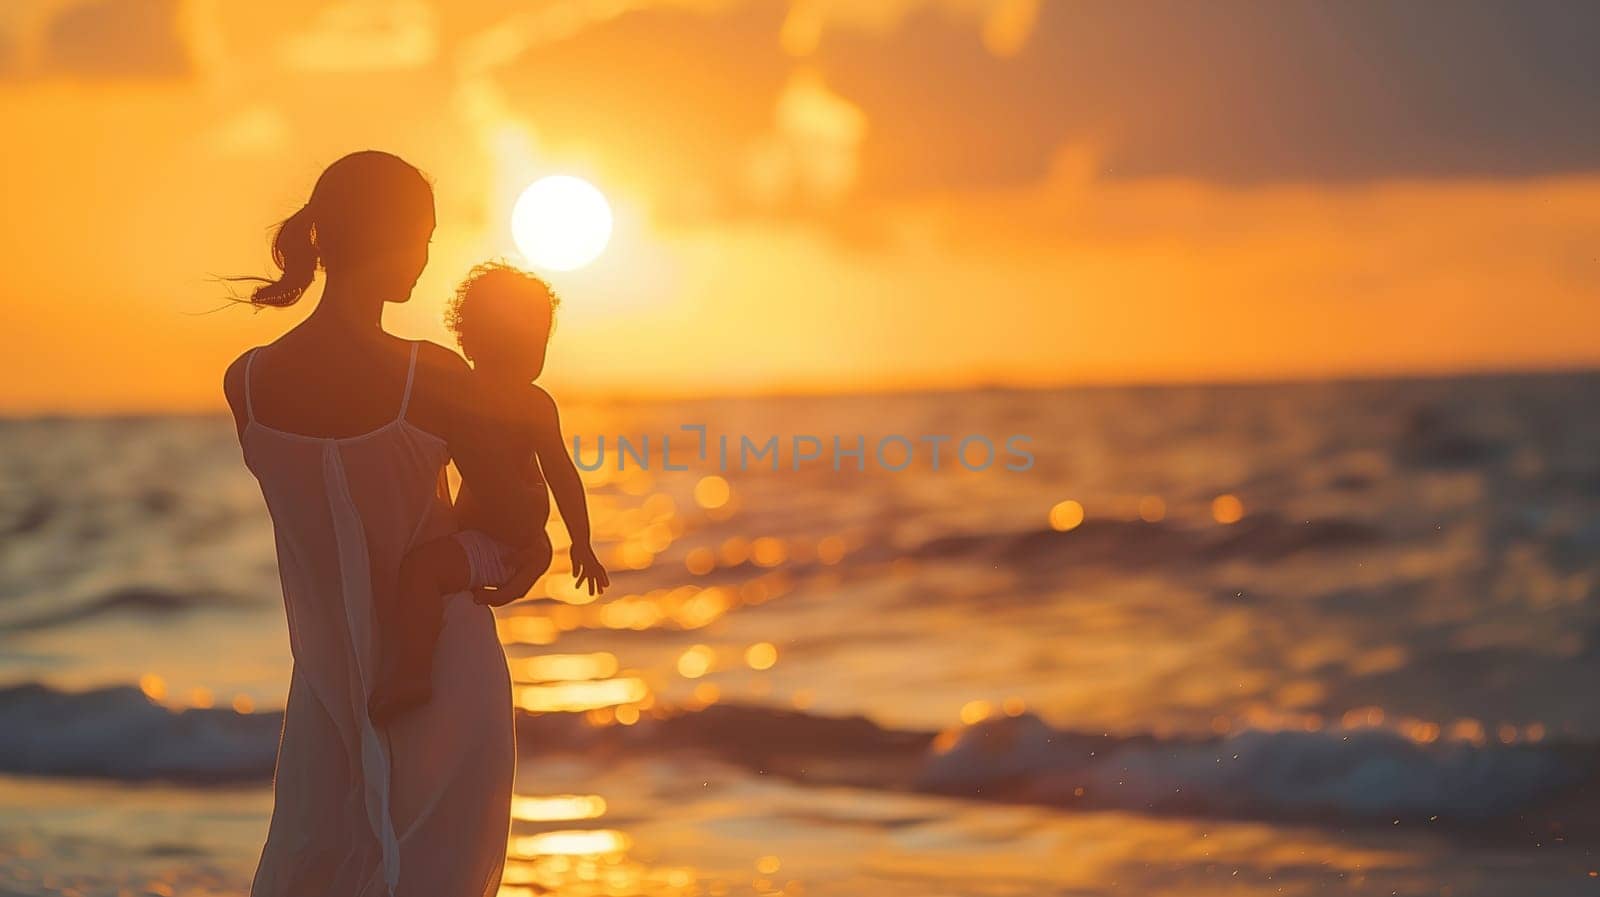 Woman Holding Baby on Beach at Sunset by TRMK